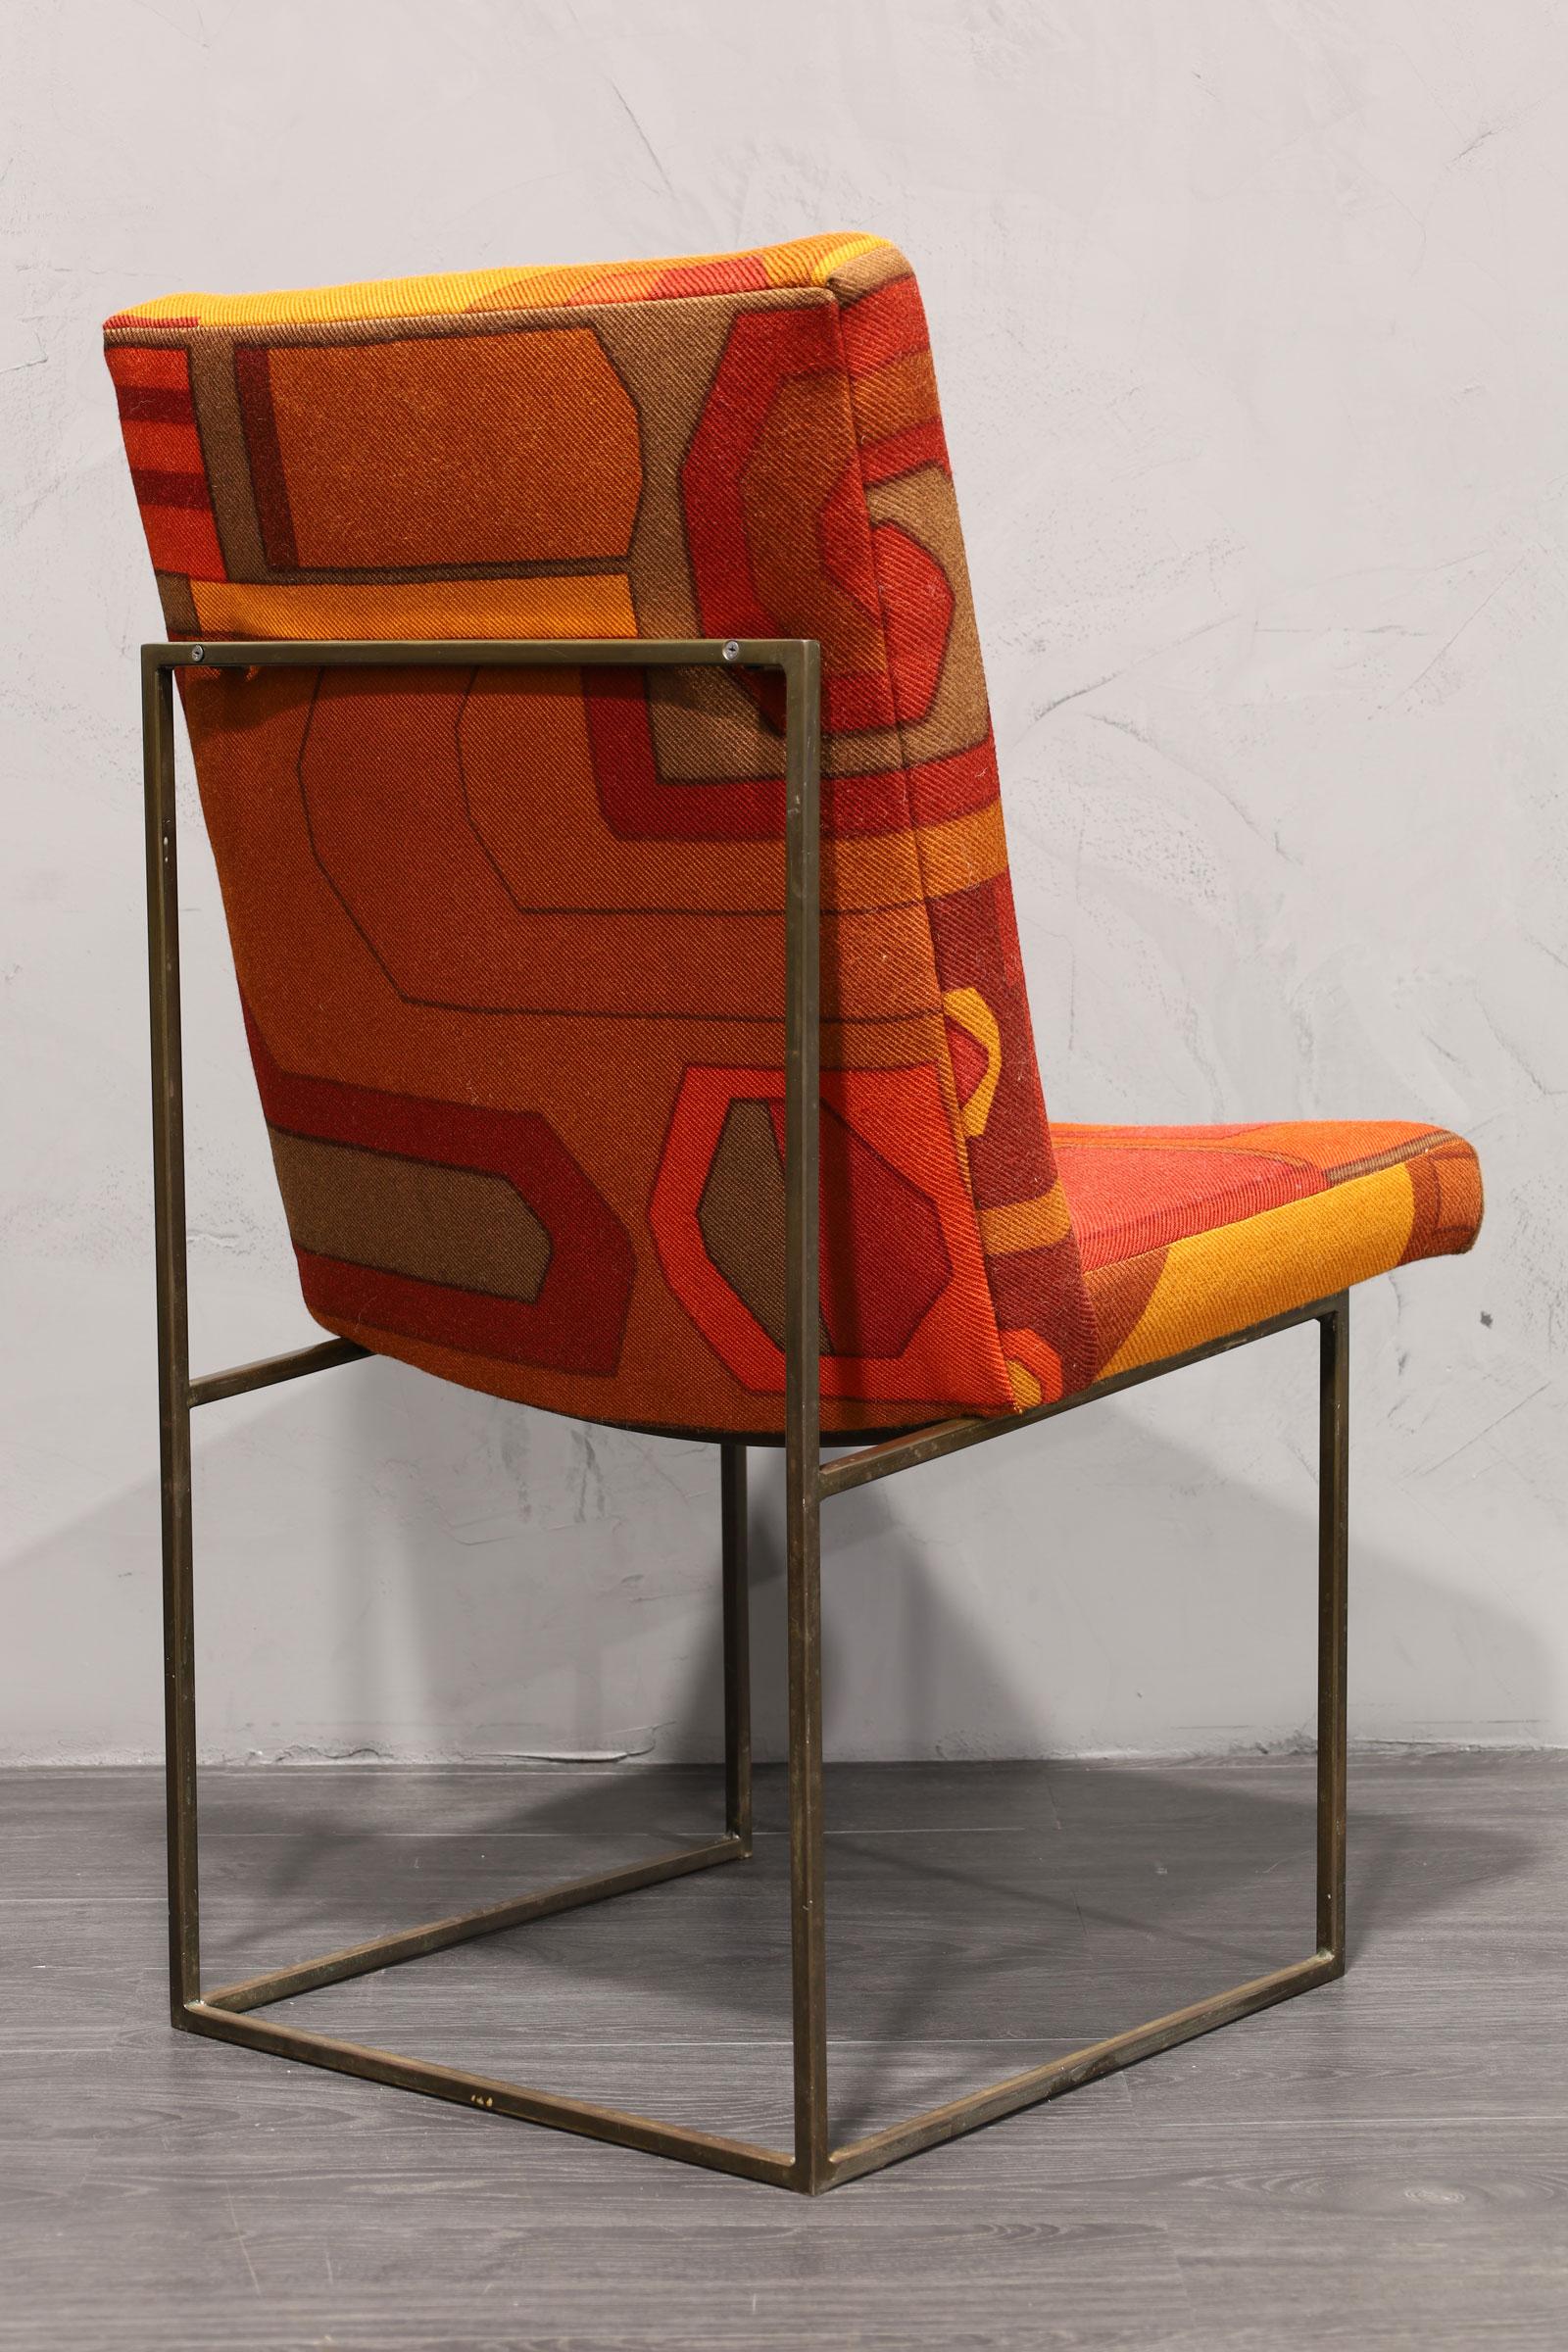 American Milo Baughman Bronze Thin Frame Chairs in Jack Lenor Larsen Upholstery For Sale